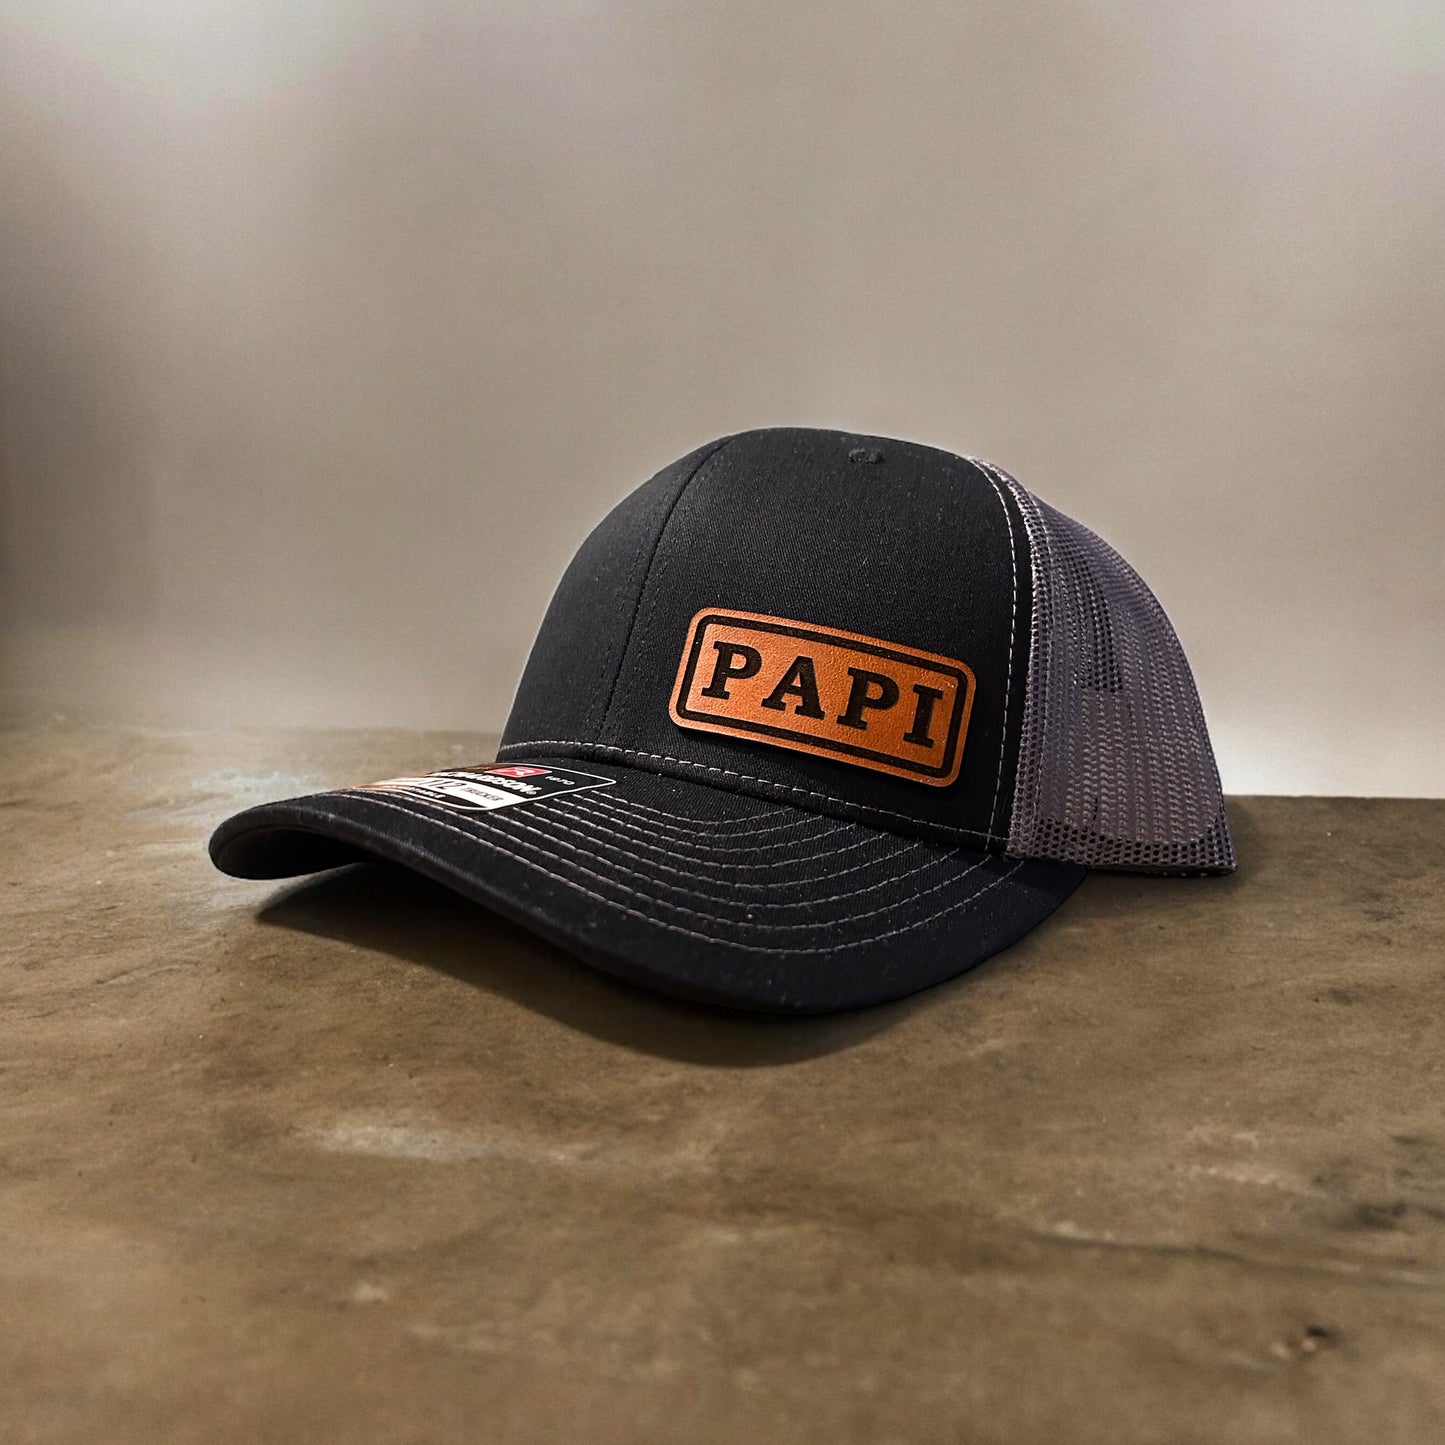 papi leather patch gift hats, fathers day gift hats for dad, gifts for fathers day, gifts for dad, papi gifts, dad hats, papi gifts, papi hats